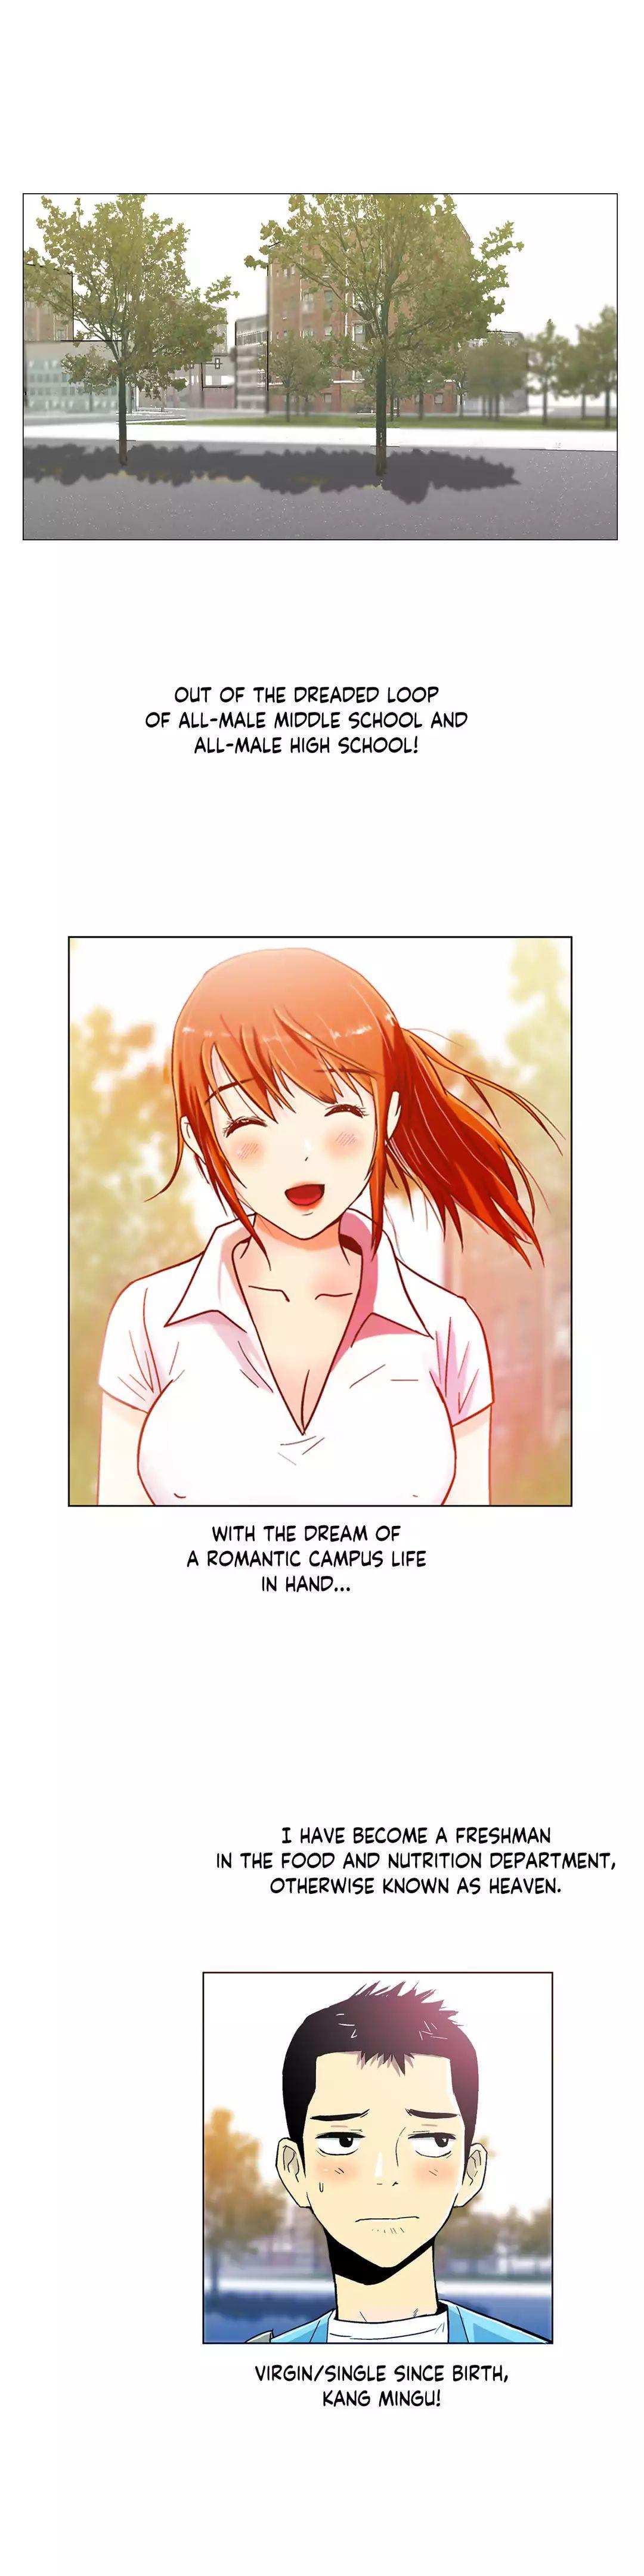 Read One-Room Hero Chapter 2: In Her One-Room on Mangakakalot